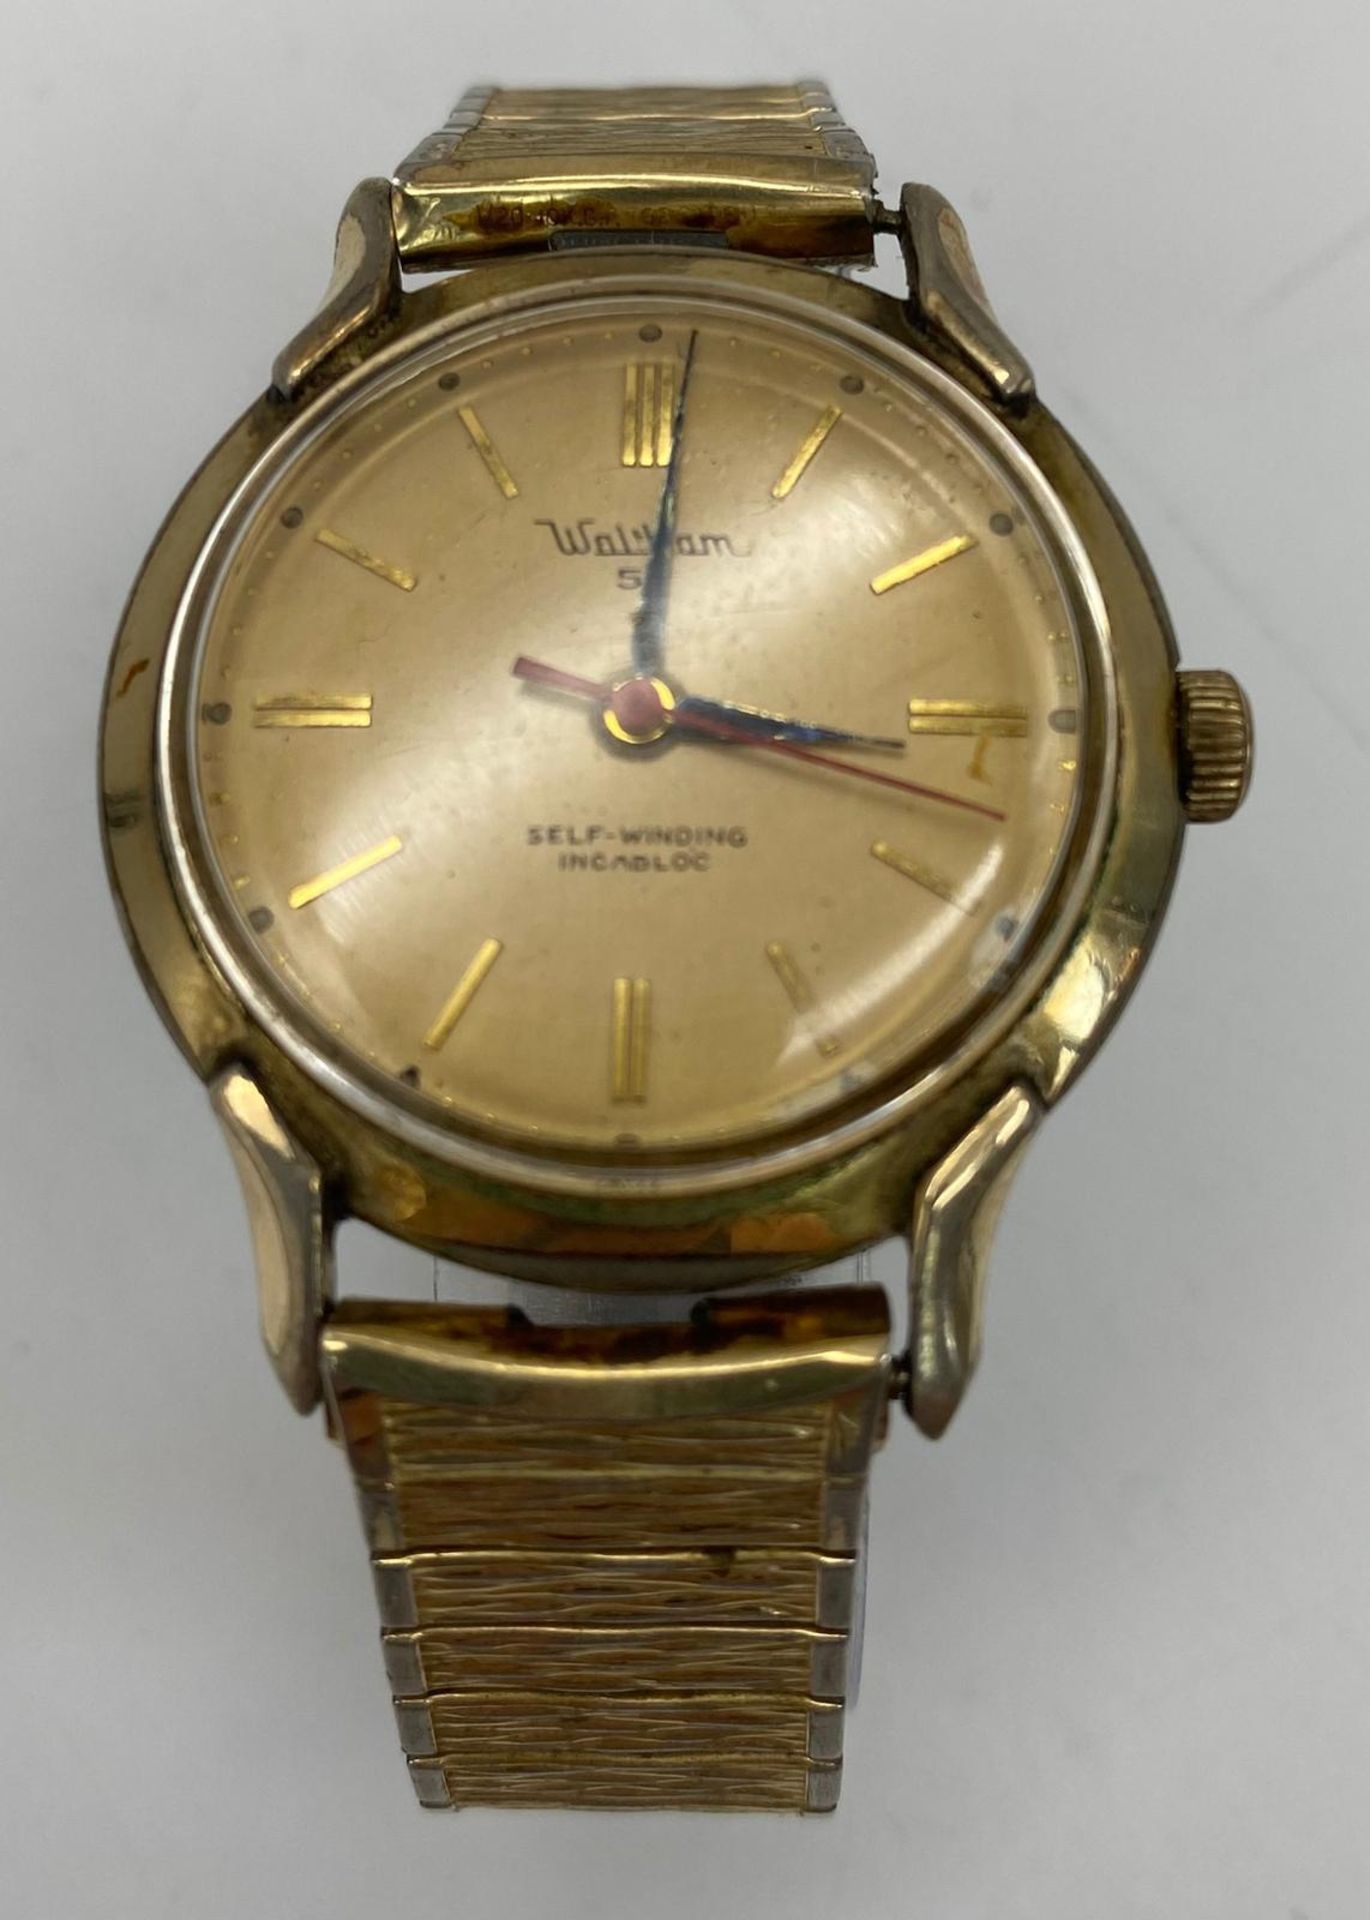 A Rare Vintage (1950s) Waltham 53 Automatic Gents Watch. Gold plated expandable bracelet. Two tone